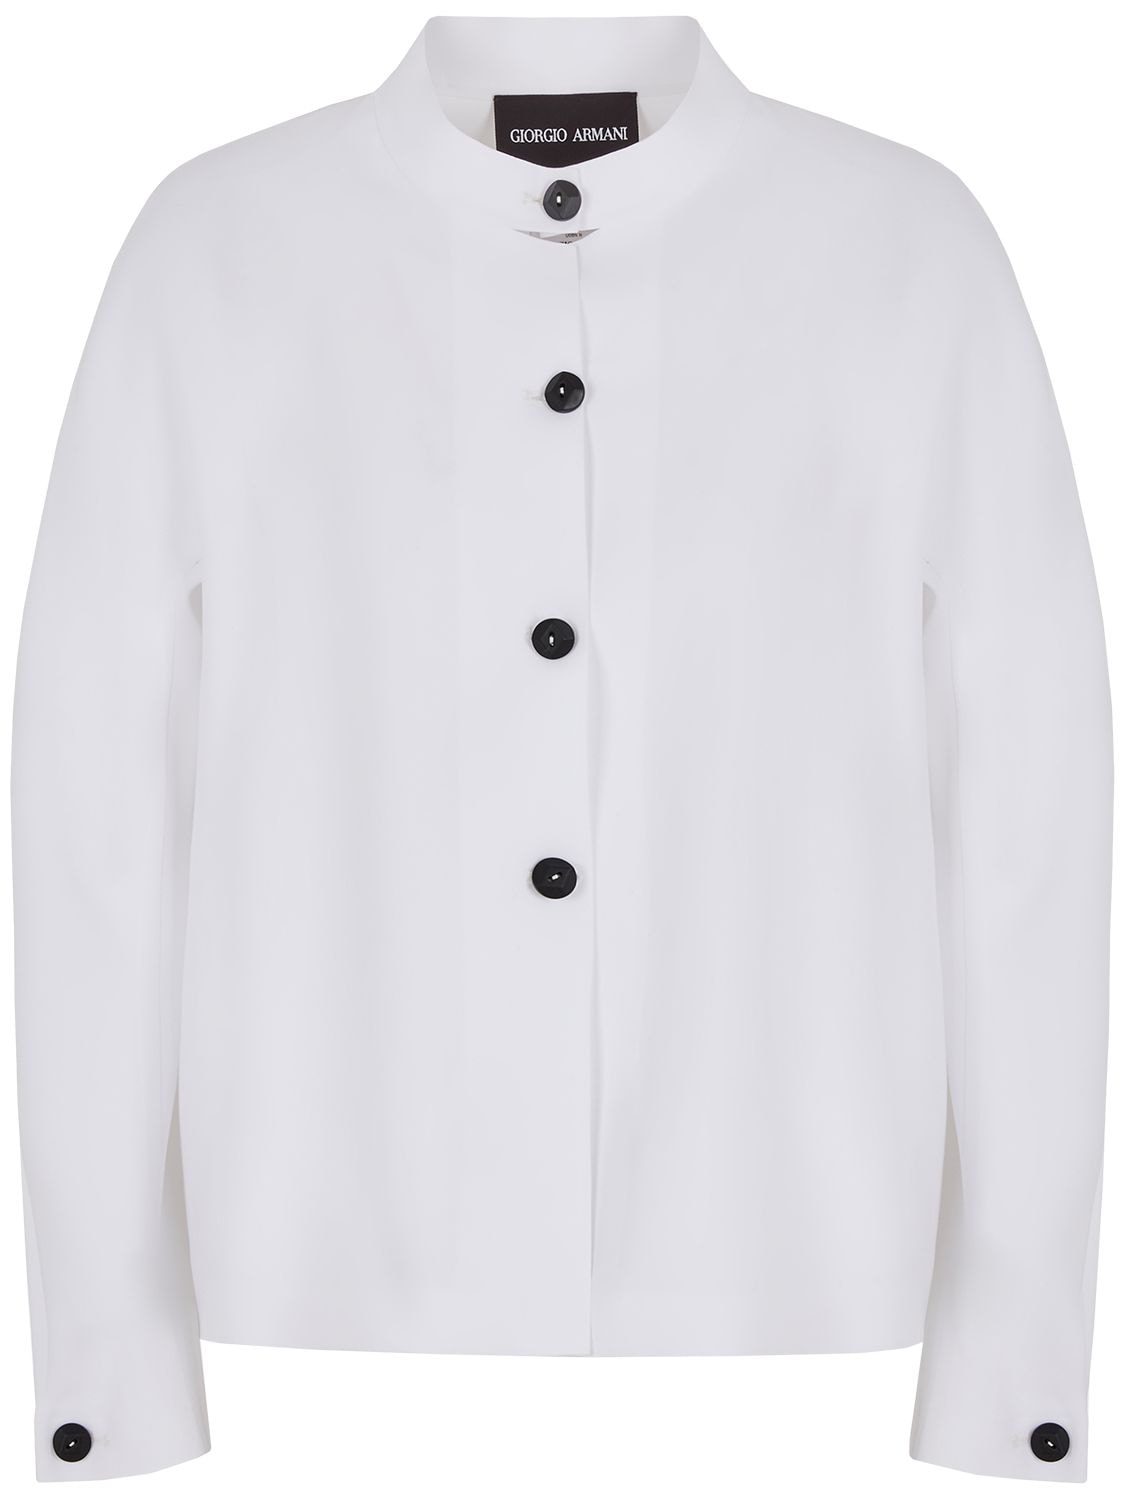 Giorgio Armani Silk Shirt Jacket With Contrast Buttons In White